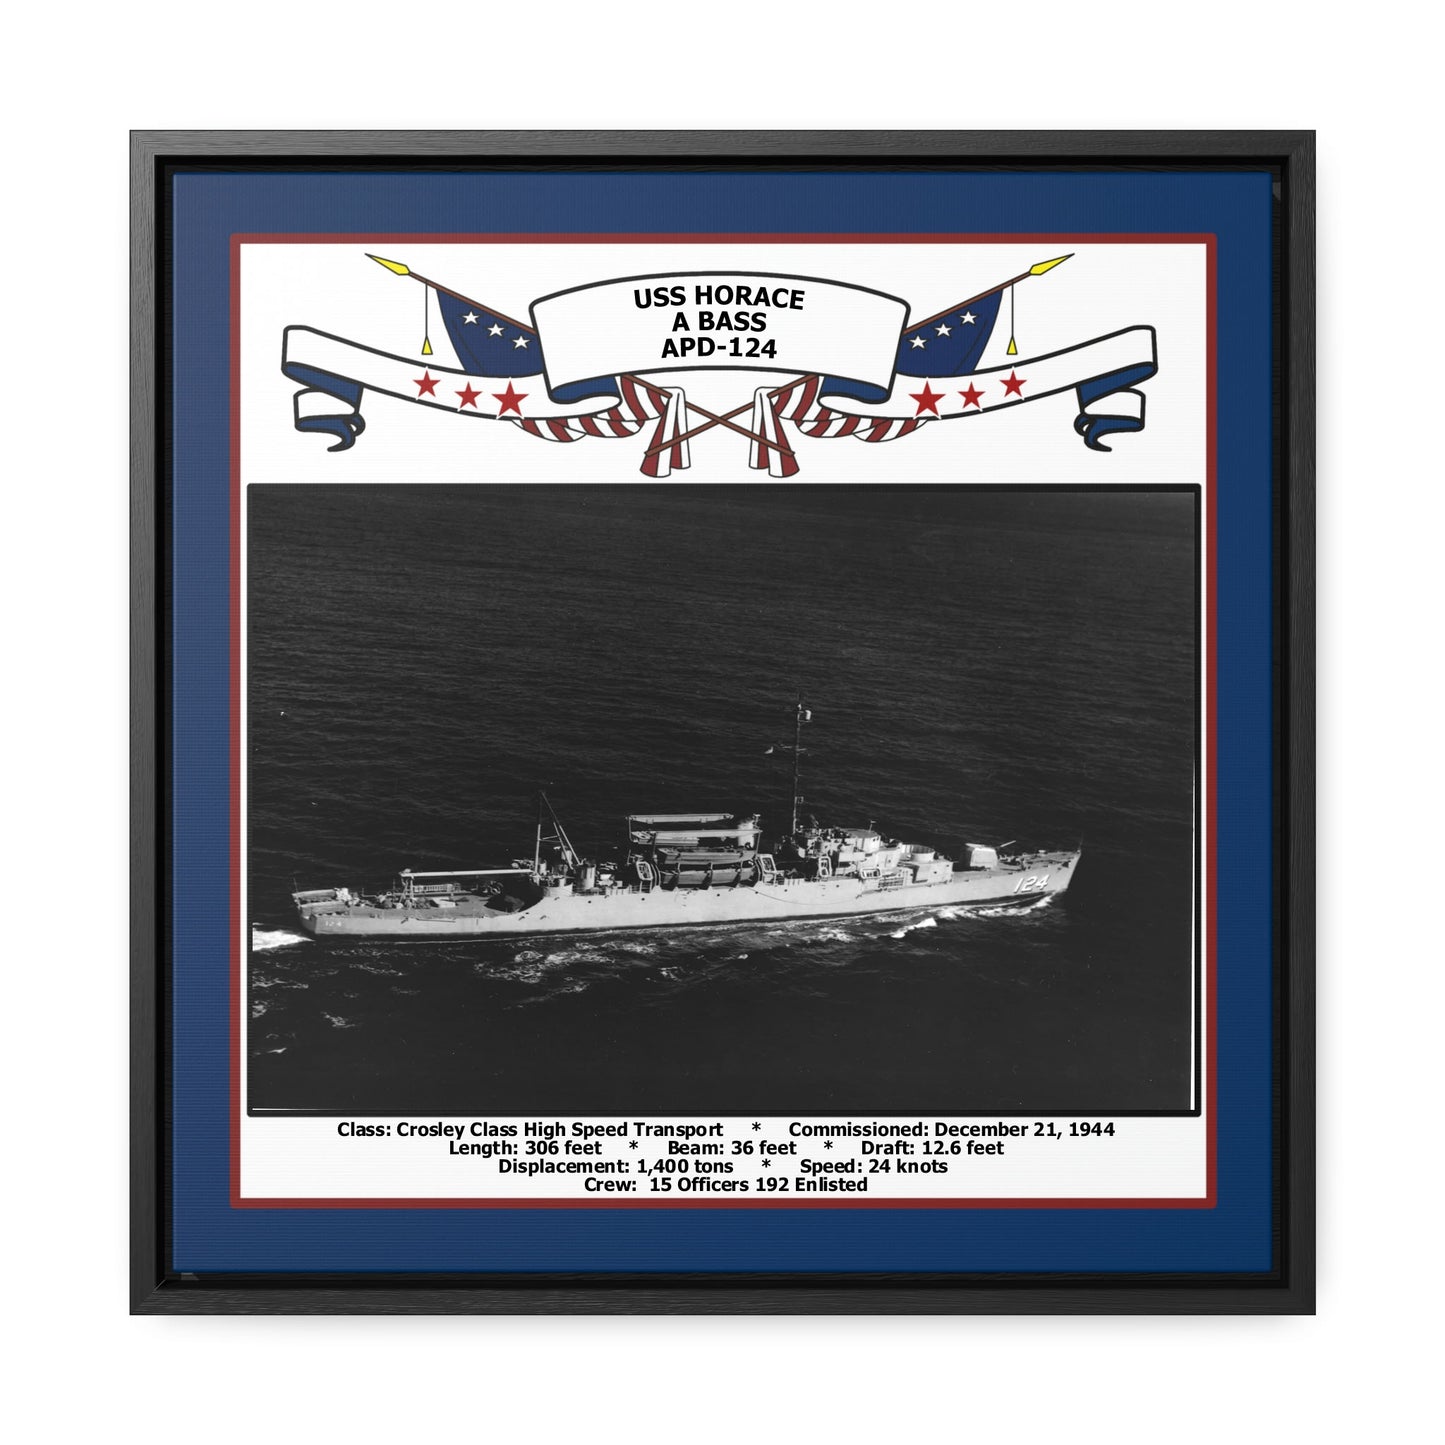 USS Horace A Bass APD-124 Navy Floating Frame Photo Front View